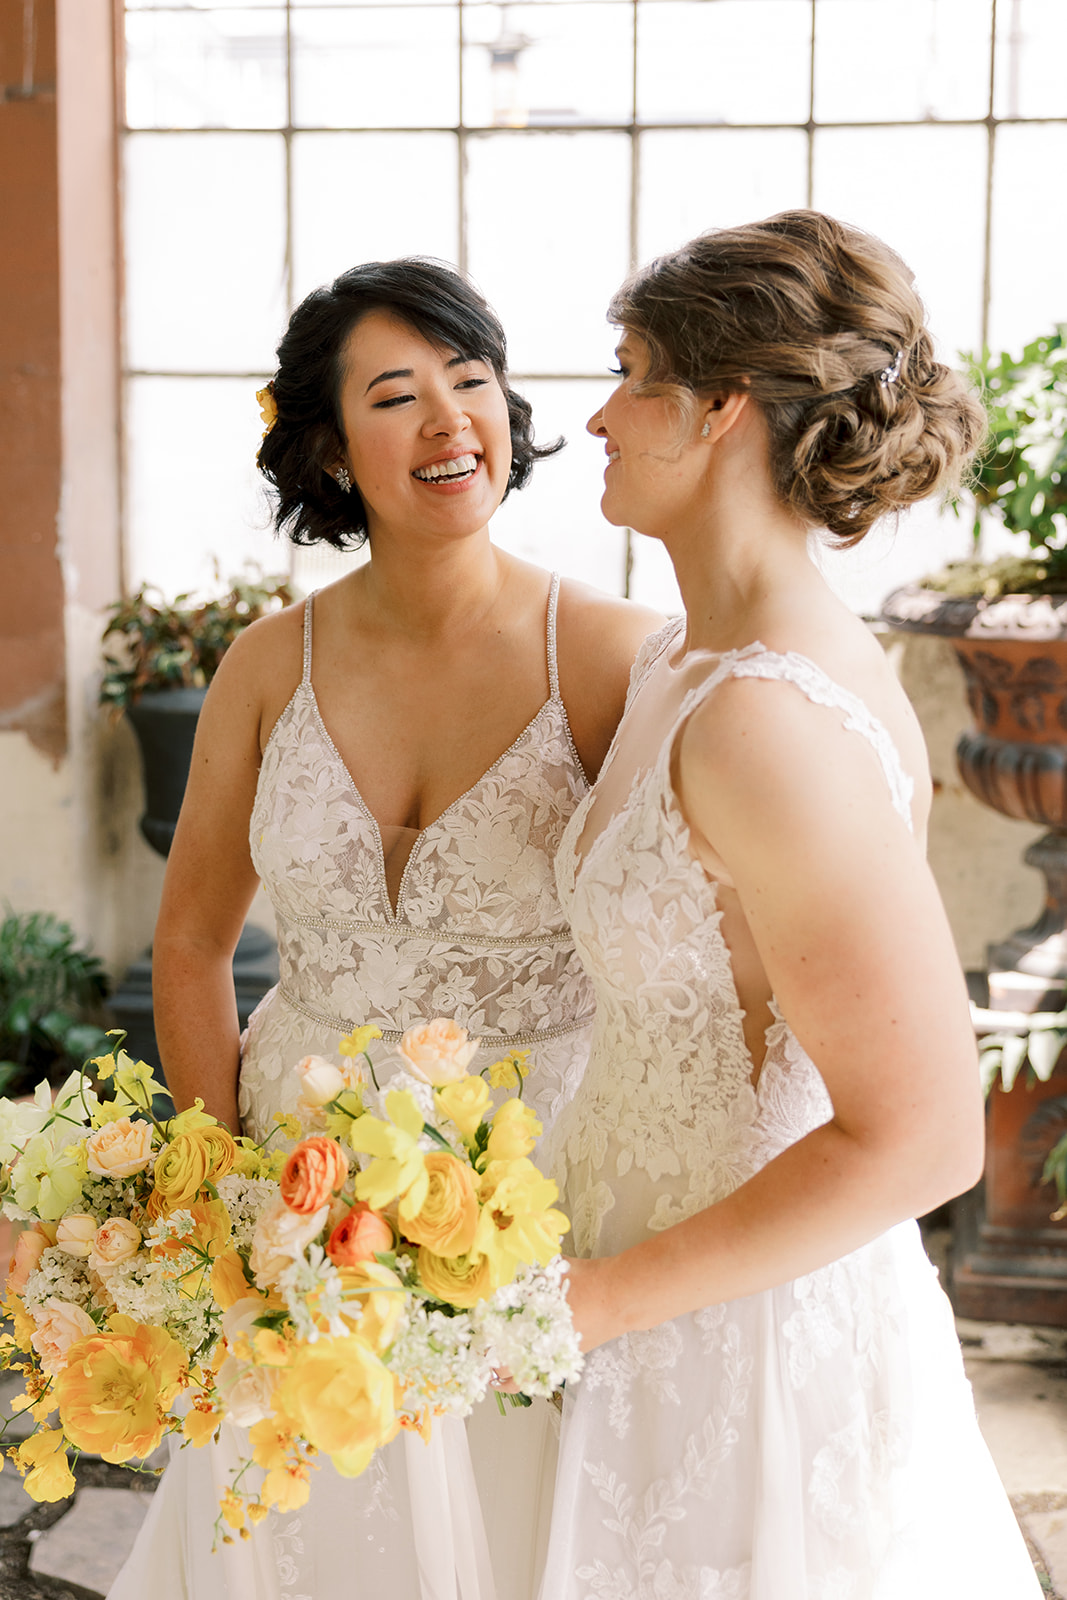 two brides holding orange and yellow bouquets and smiling at each other